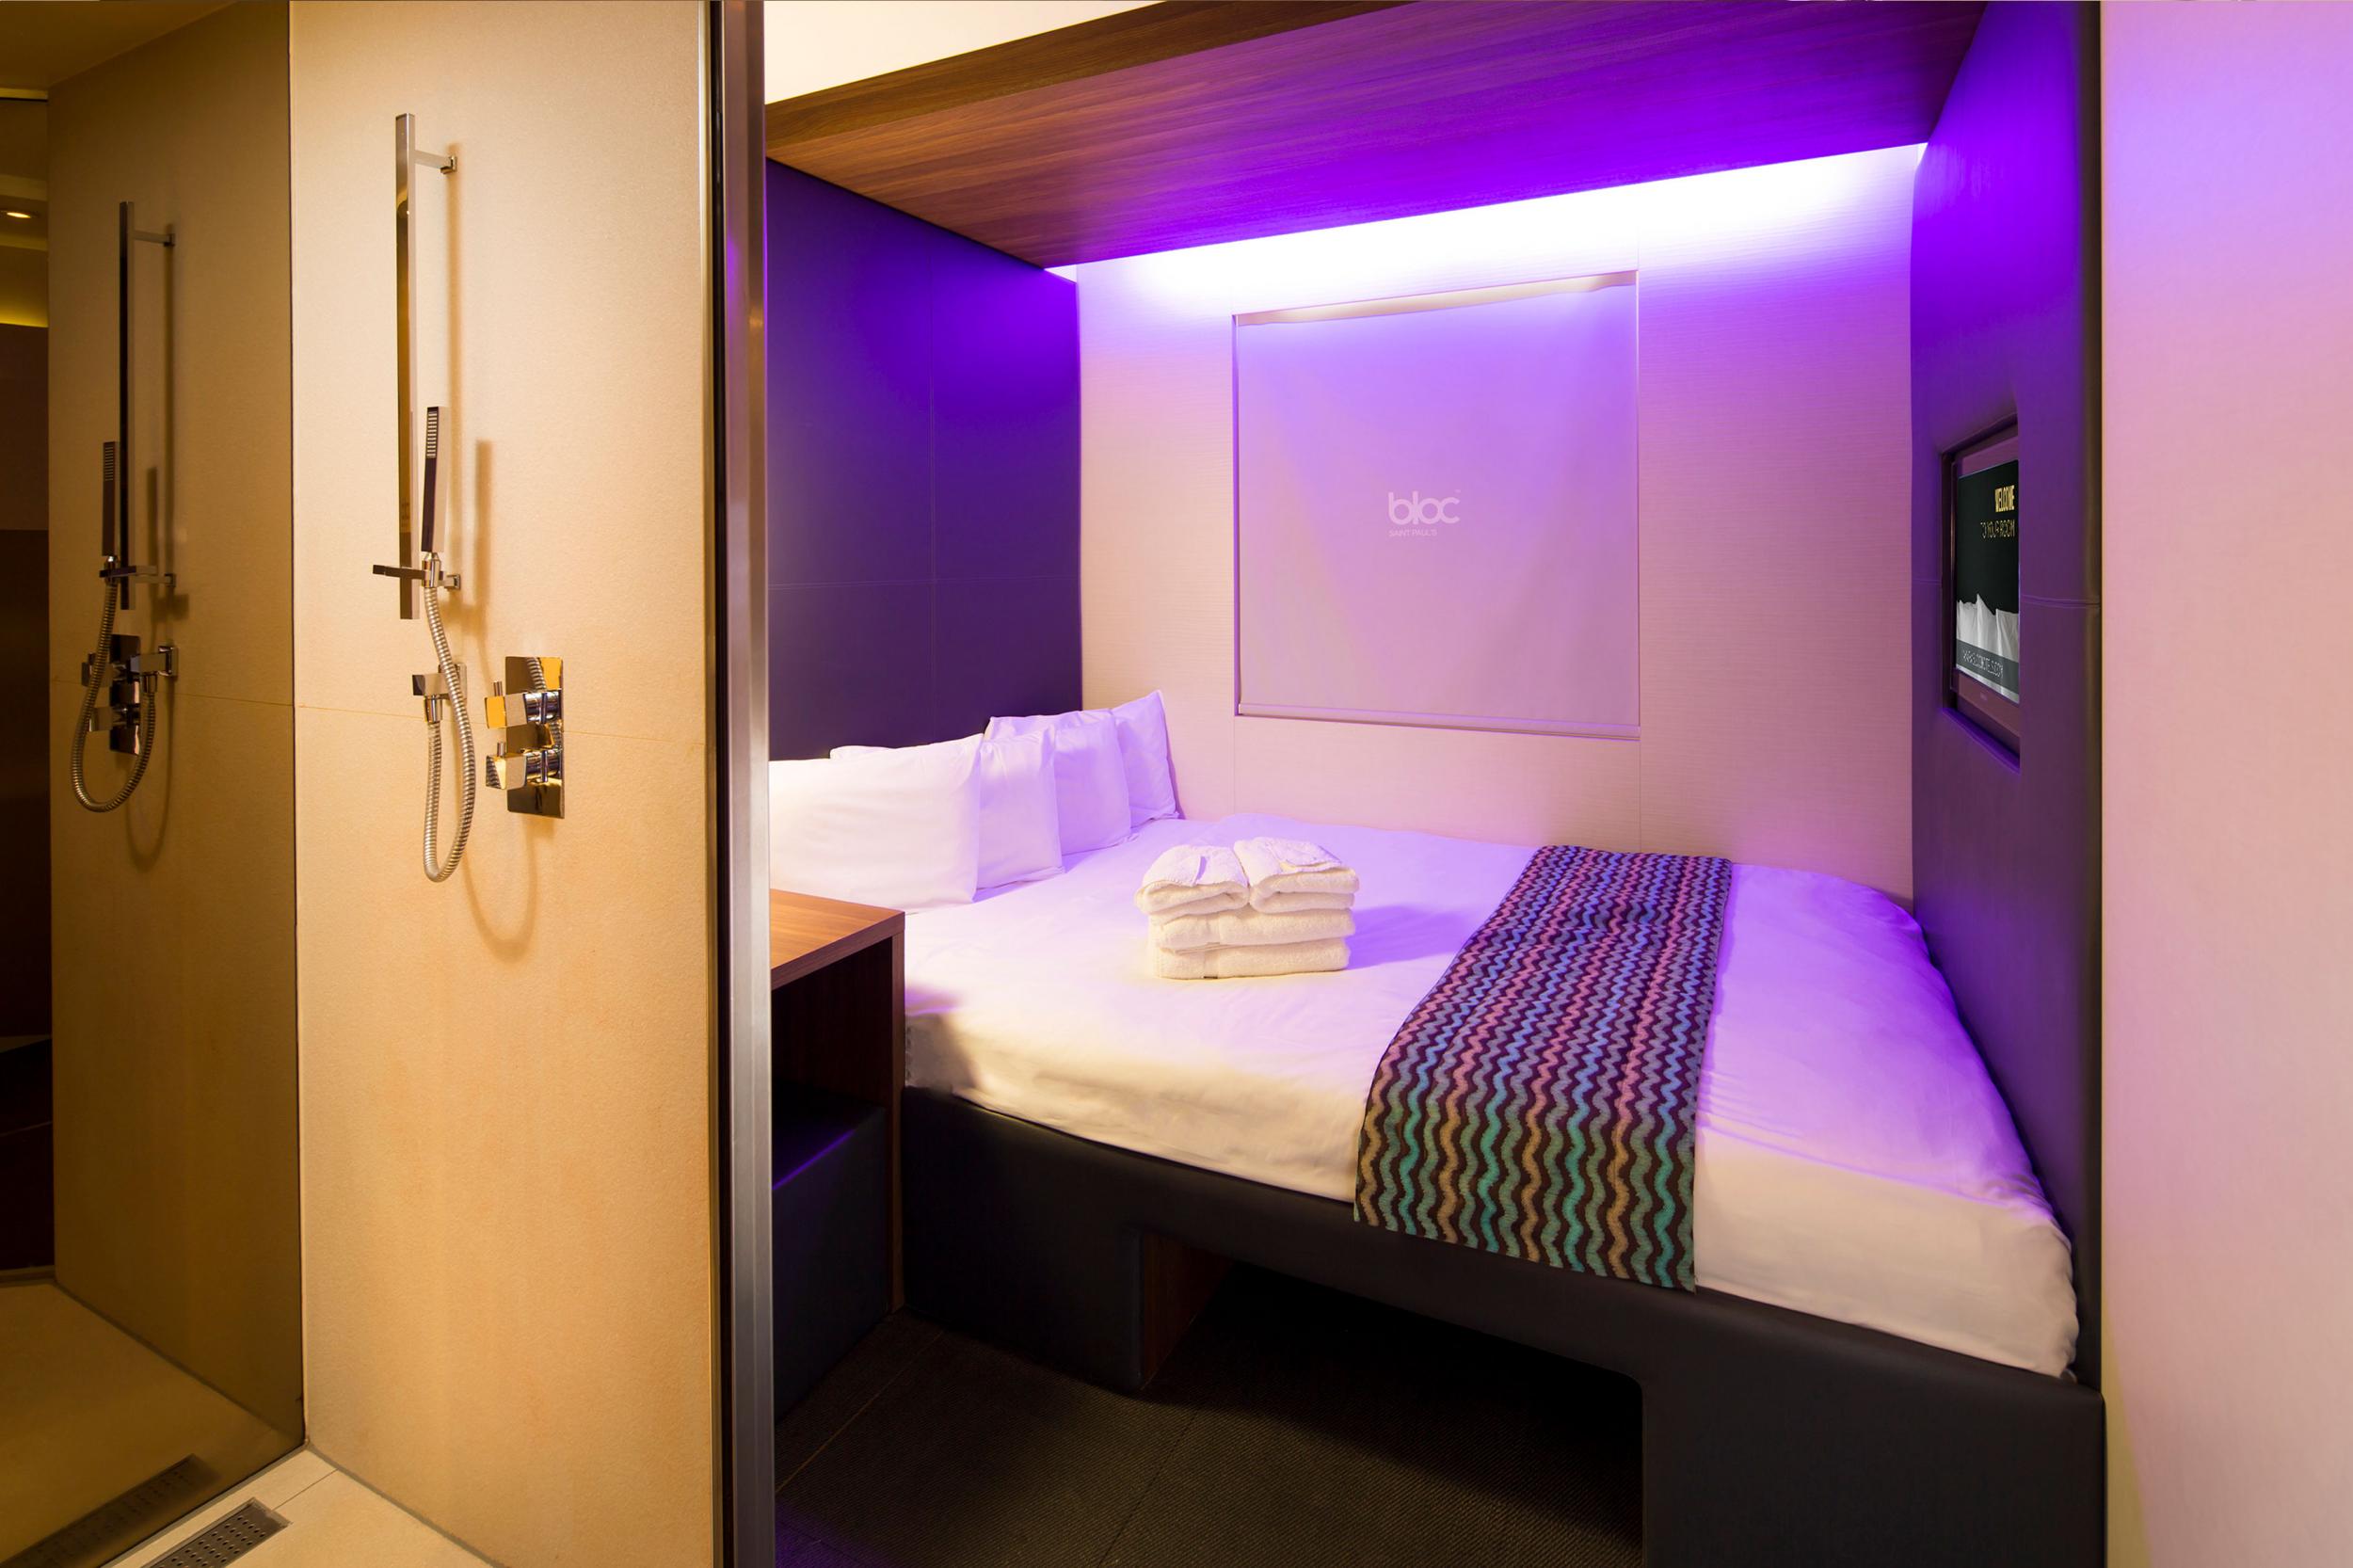 In addition to a sleek design, the Bloc Hotel is also a reasonable choice for those on a budget